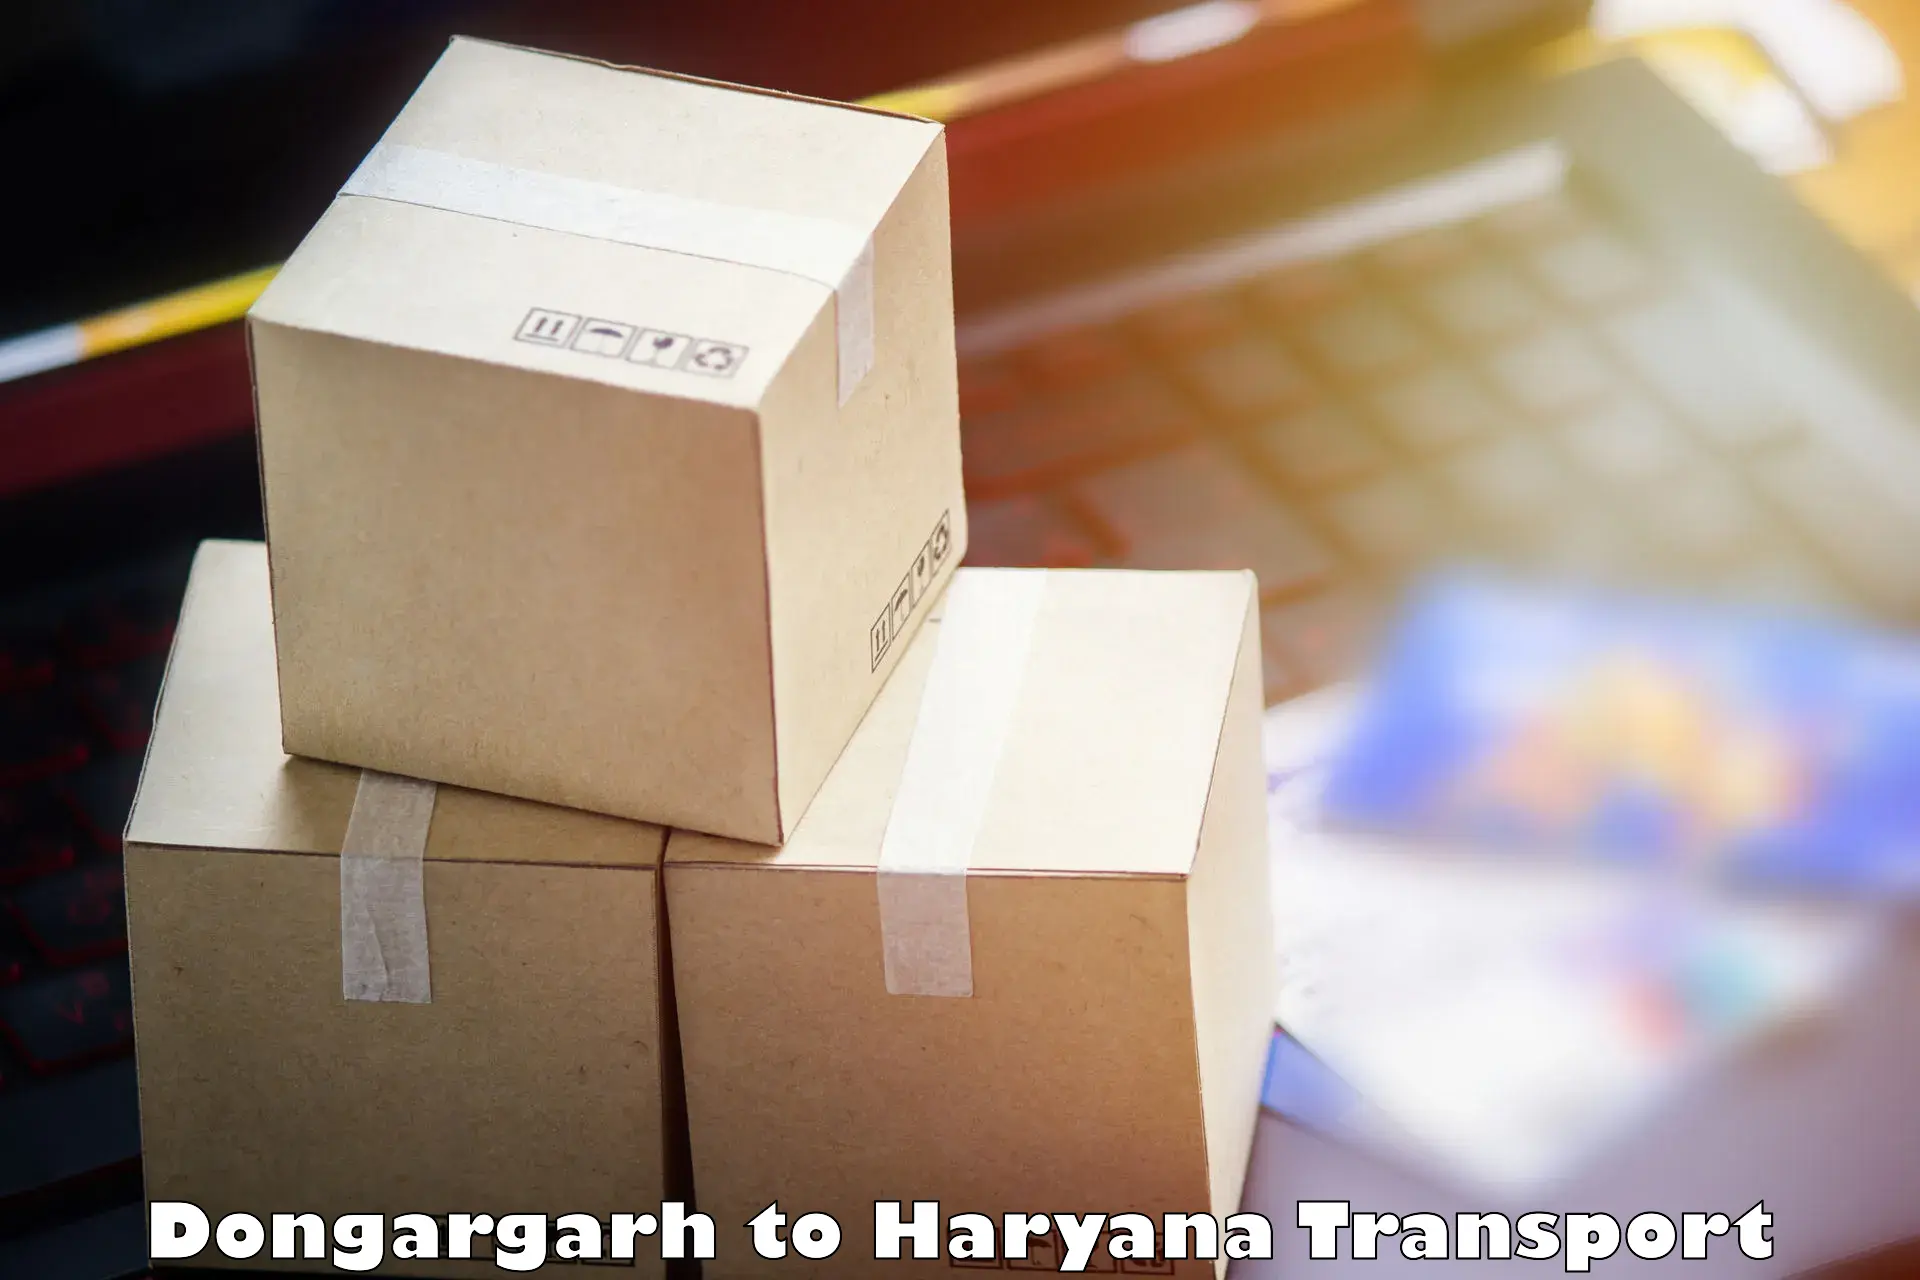 Commercial transport service Dongargarh to NCR Haryana